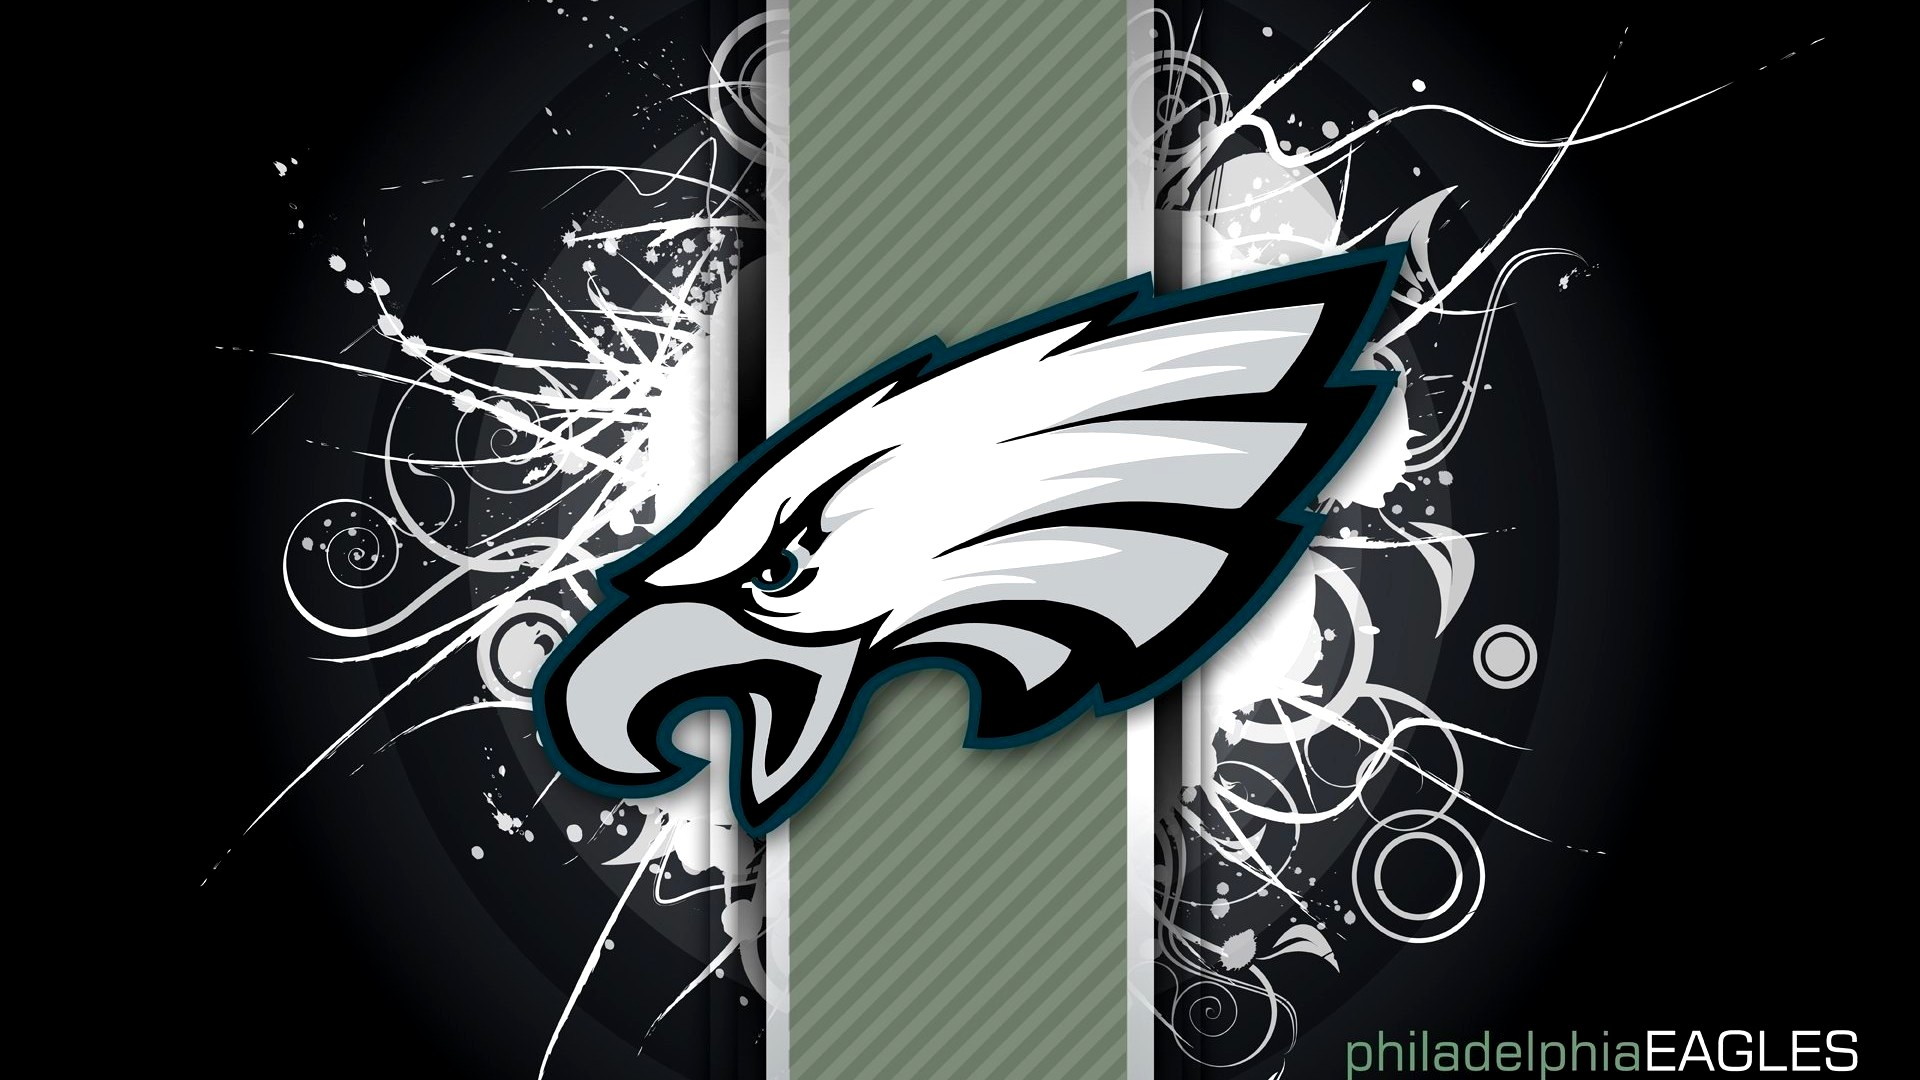 Philadelphia Eagles Mac Wallpaper with high-resolution 1920x1080 pixel. You can use and set as wallpaper for Notebook Screensavers, Mac Wallpapers, Mobile Home Screen, iPhone or Android Phones Lock Screen